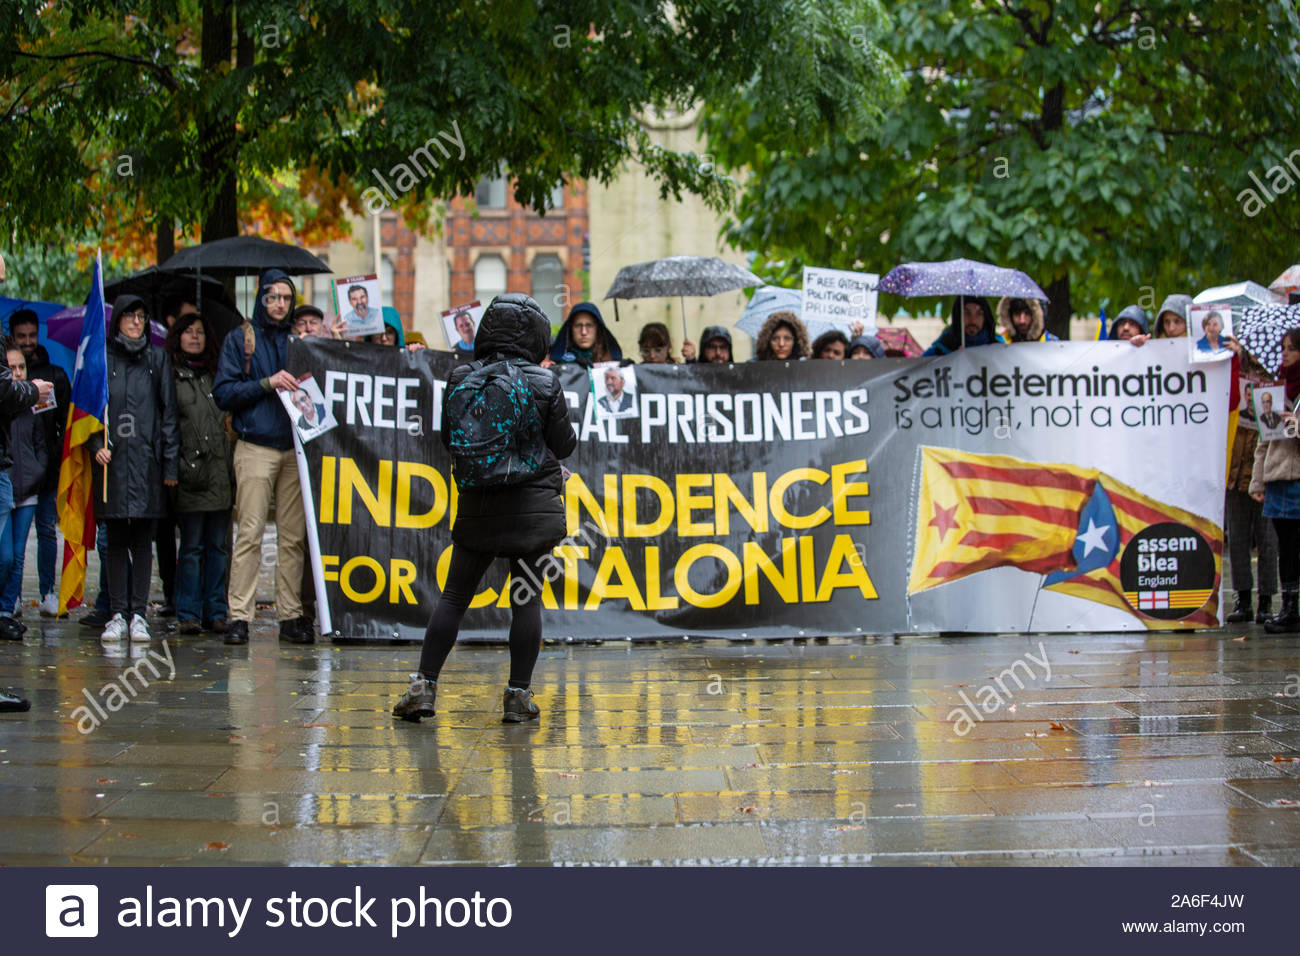 Manchester, UK, 26th October 2019. A small protest in favour of independence for Catalonia has taken place in Manchester. Holding pictures of Catalonian politicians recently jailed in Spain, the protesters listened to speeches against the actions of the Spanish government. Credit: Clearpix/Alamy Live News Credit: Clearpix/Alamy Live News Stock Photo